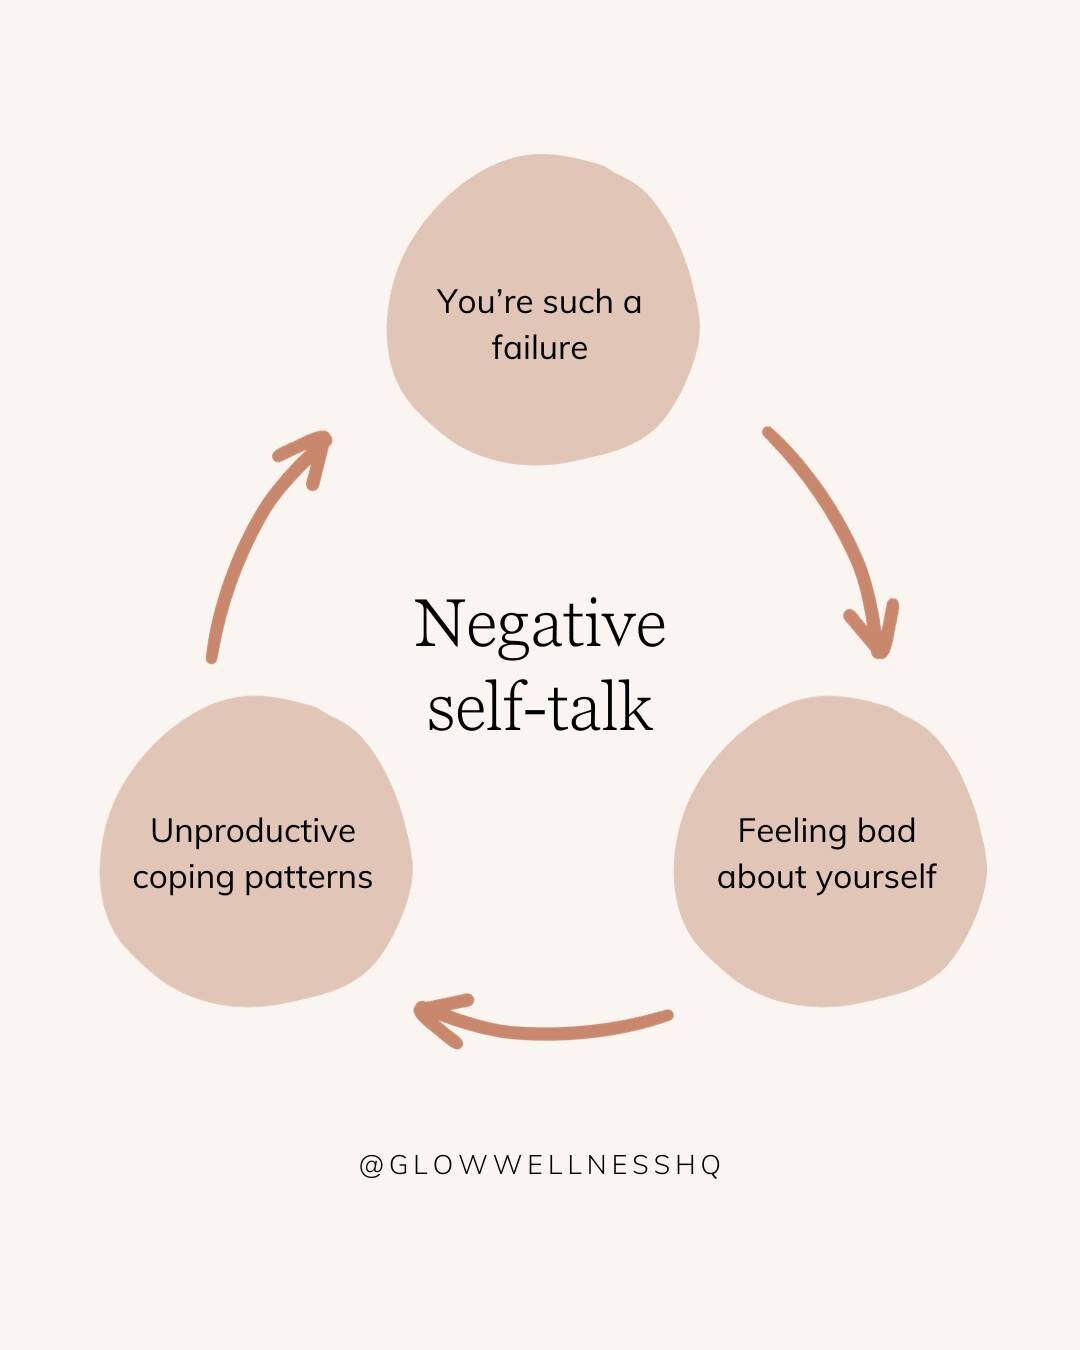 If this is a something you're doing, then you're in a loop 😕

❗️The good news is there's a surprisingly easy way to break the loop for good 👉🏻 and then you can re-pattern and practice better ways of talking to yourself 👉🏻 which then becomes the 